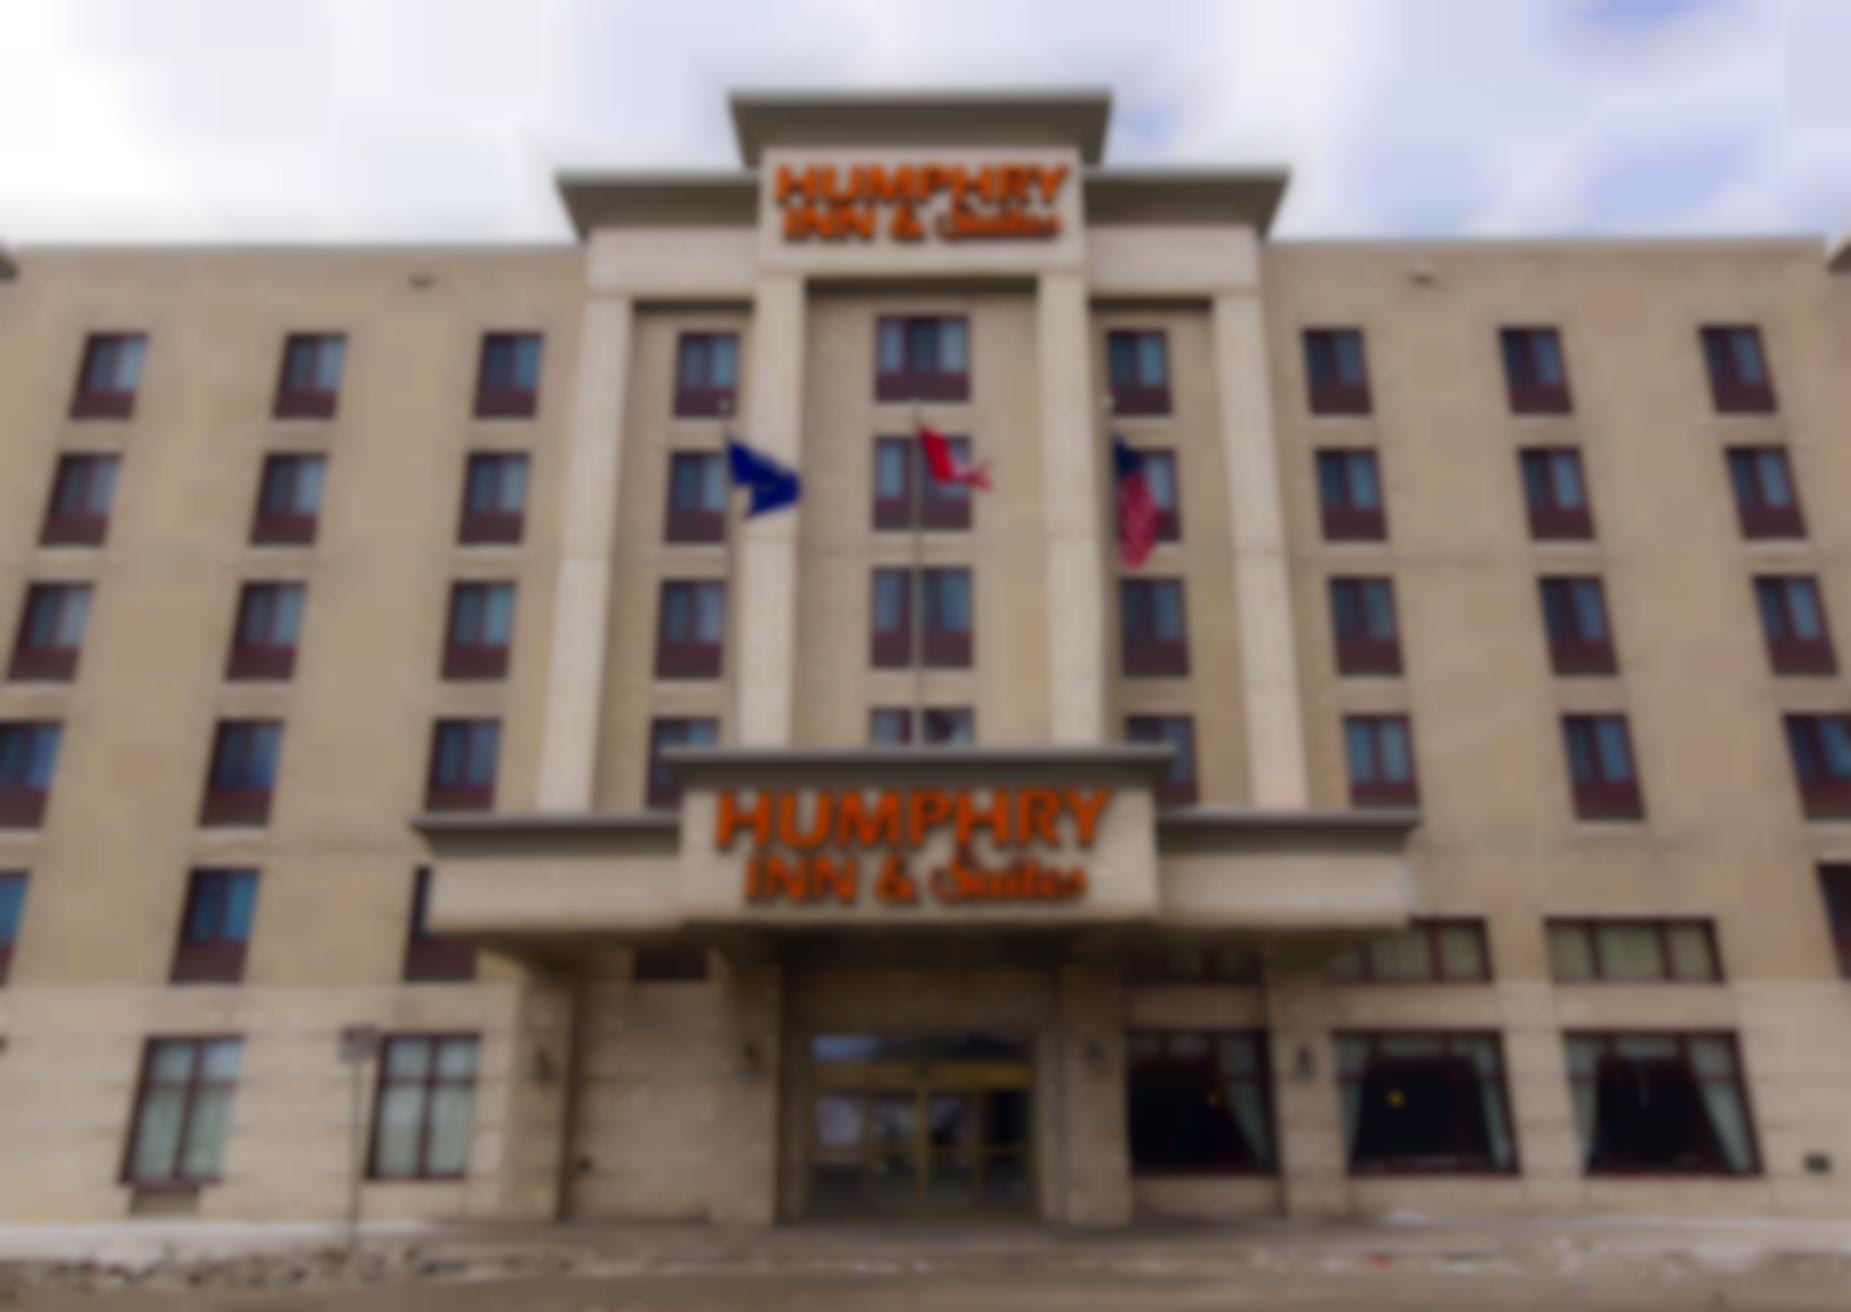 Humphry Inn & Suites